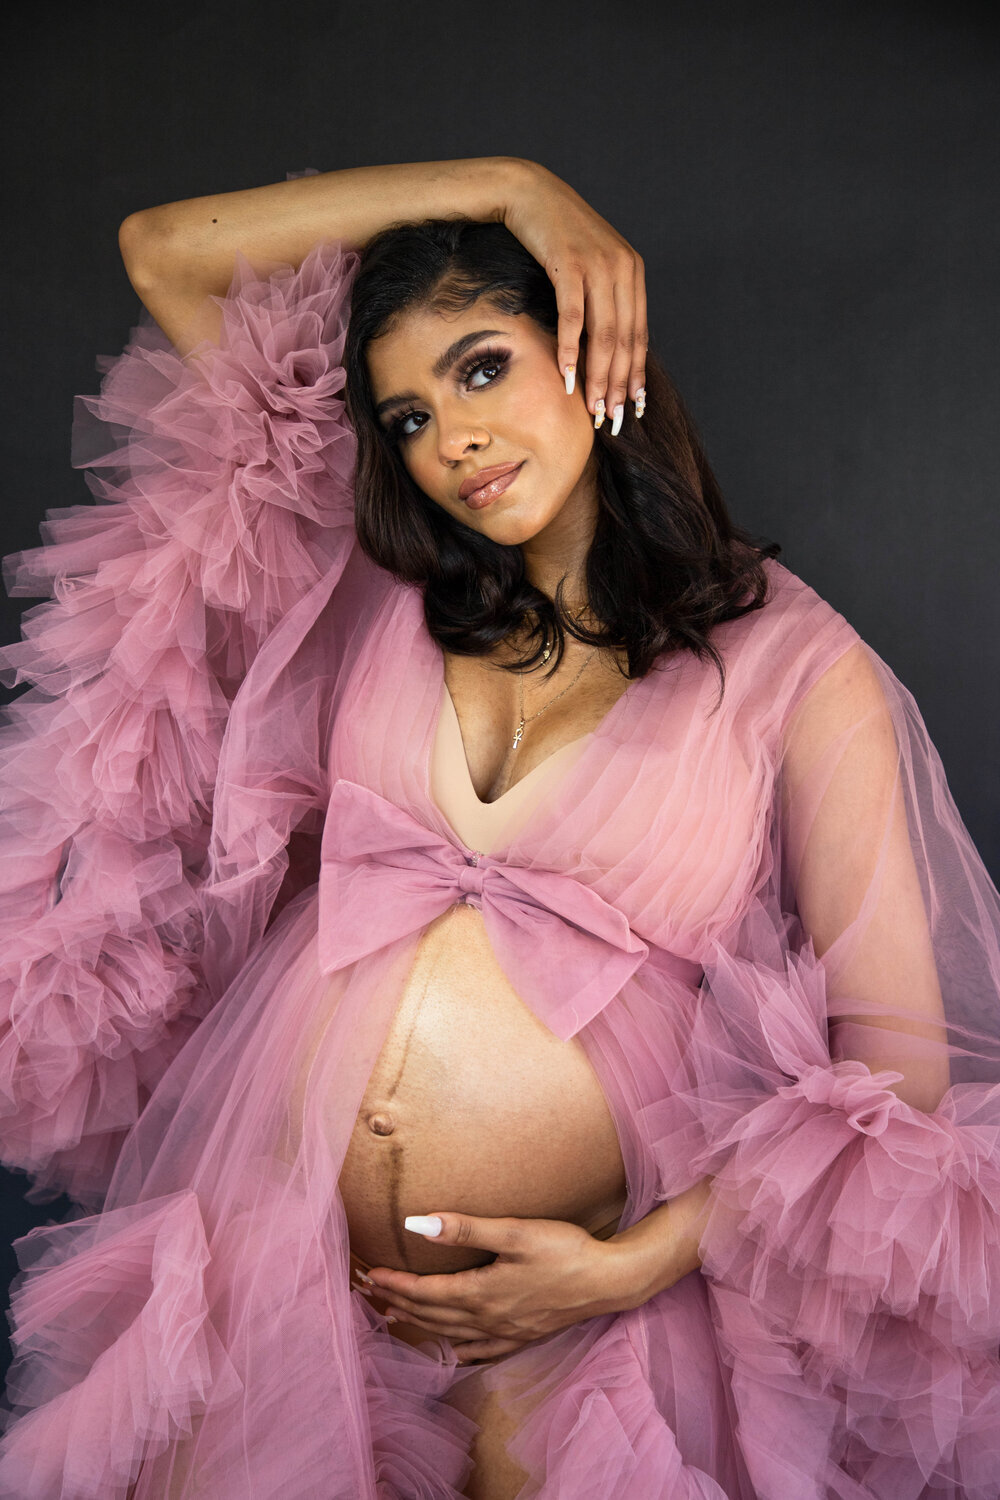  Pregnant woman wearing dusty rose ruffled robe with bell sleeves posing with one hand under belly and other hand on her head 